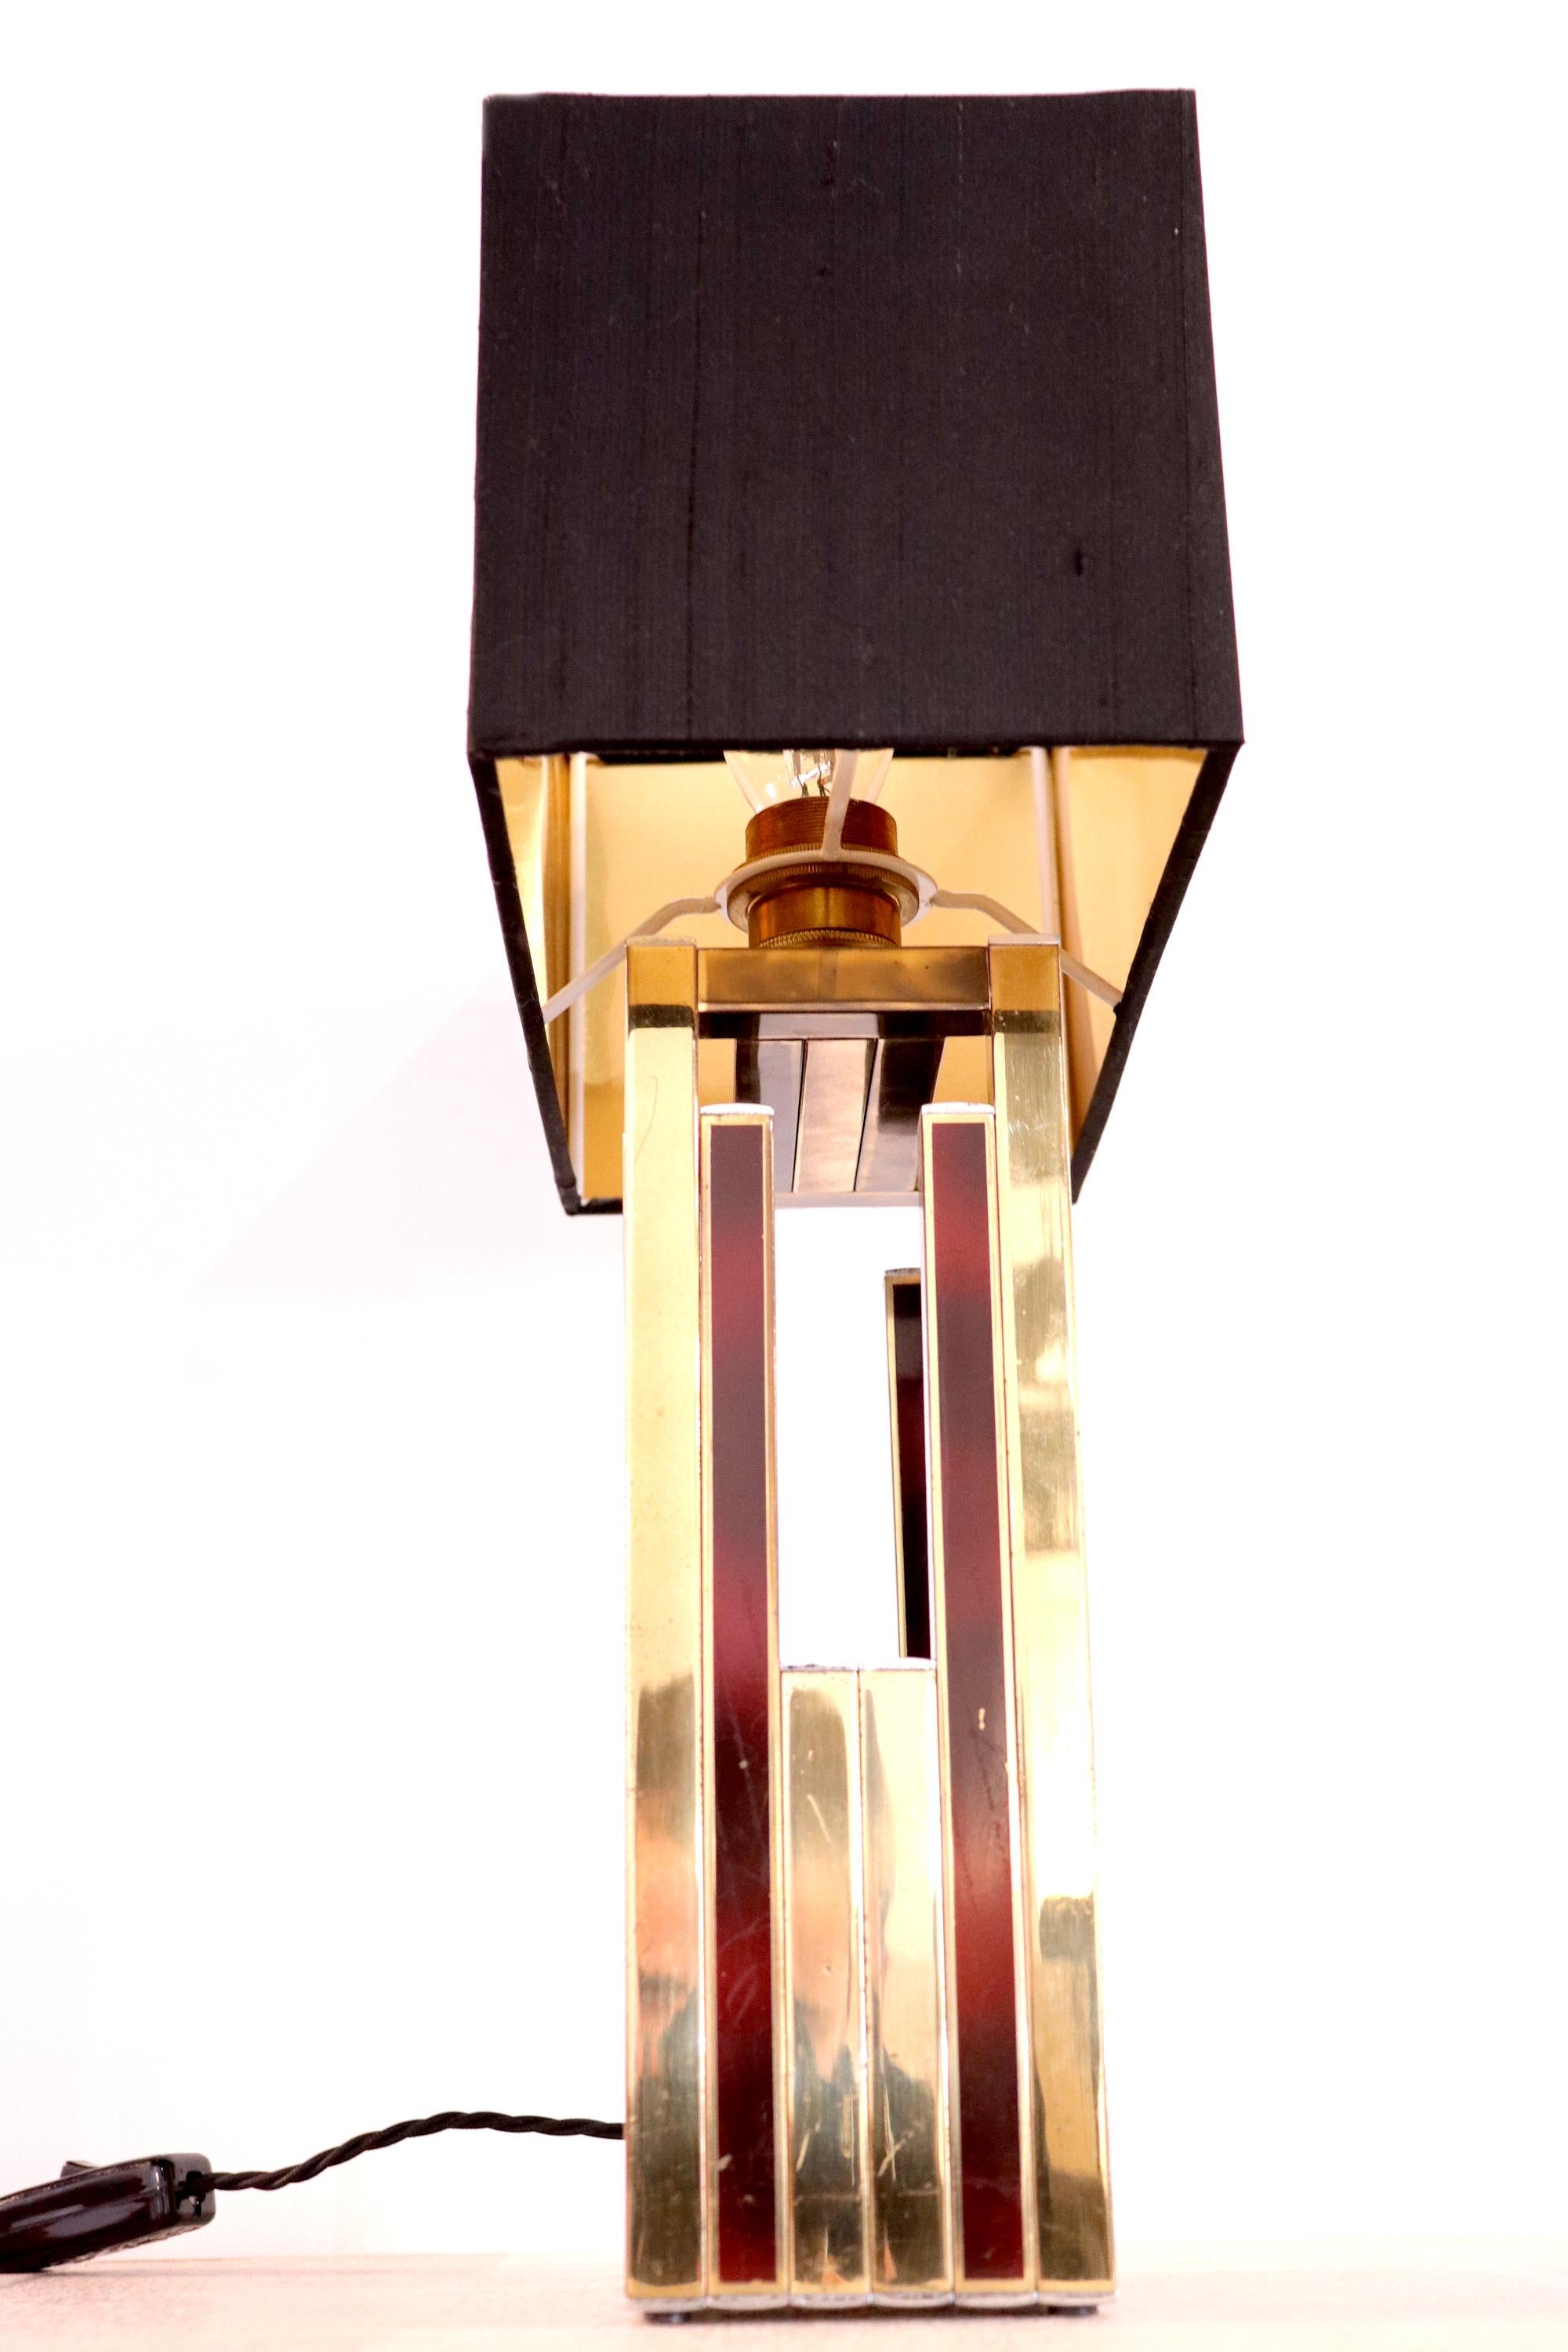 20th Century Rare mid century table lamp by Willy Rizzo for BD Lumica, 1970s.